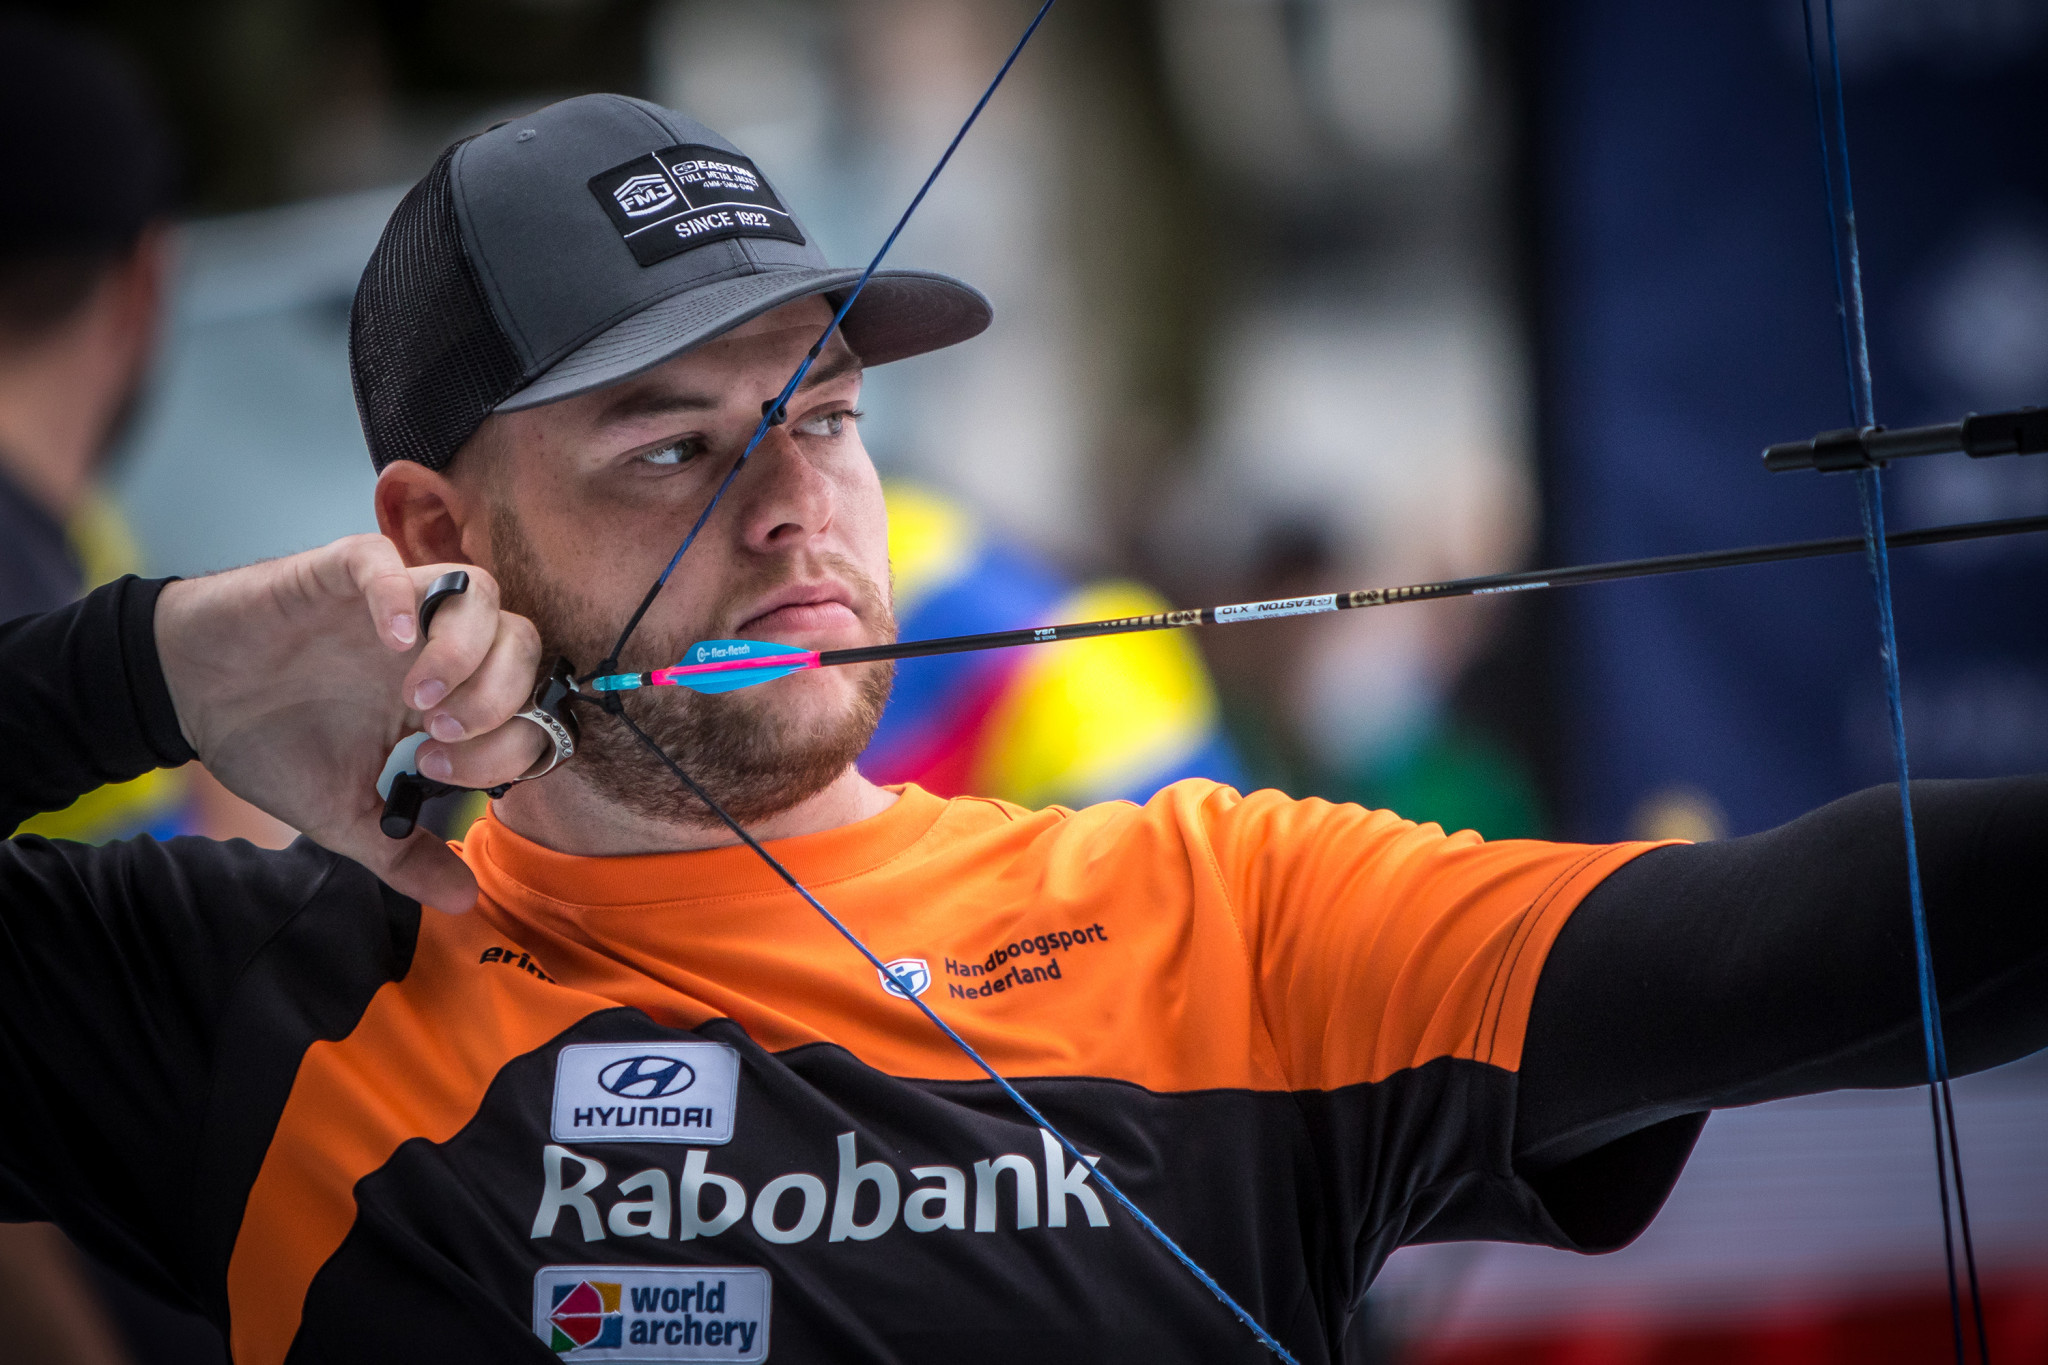 Schloesser and Mlinaric aiming for gold at European Field Archery Championships 2021